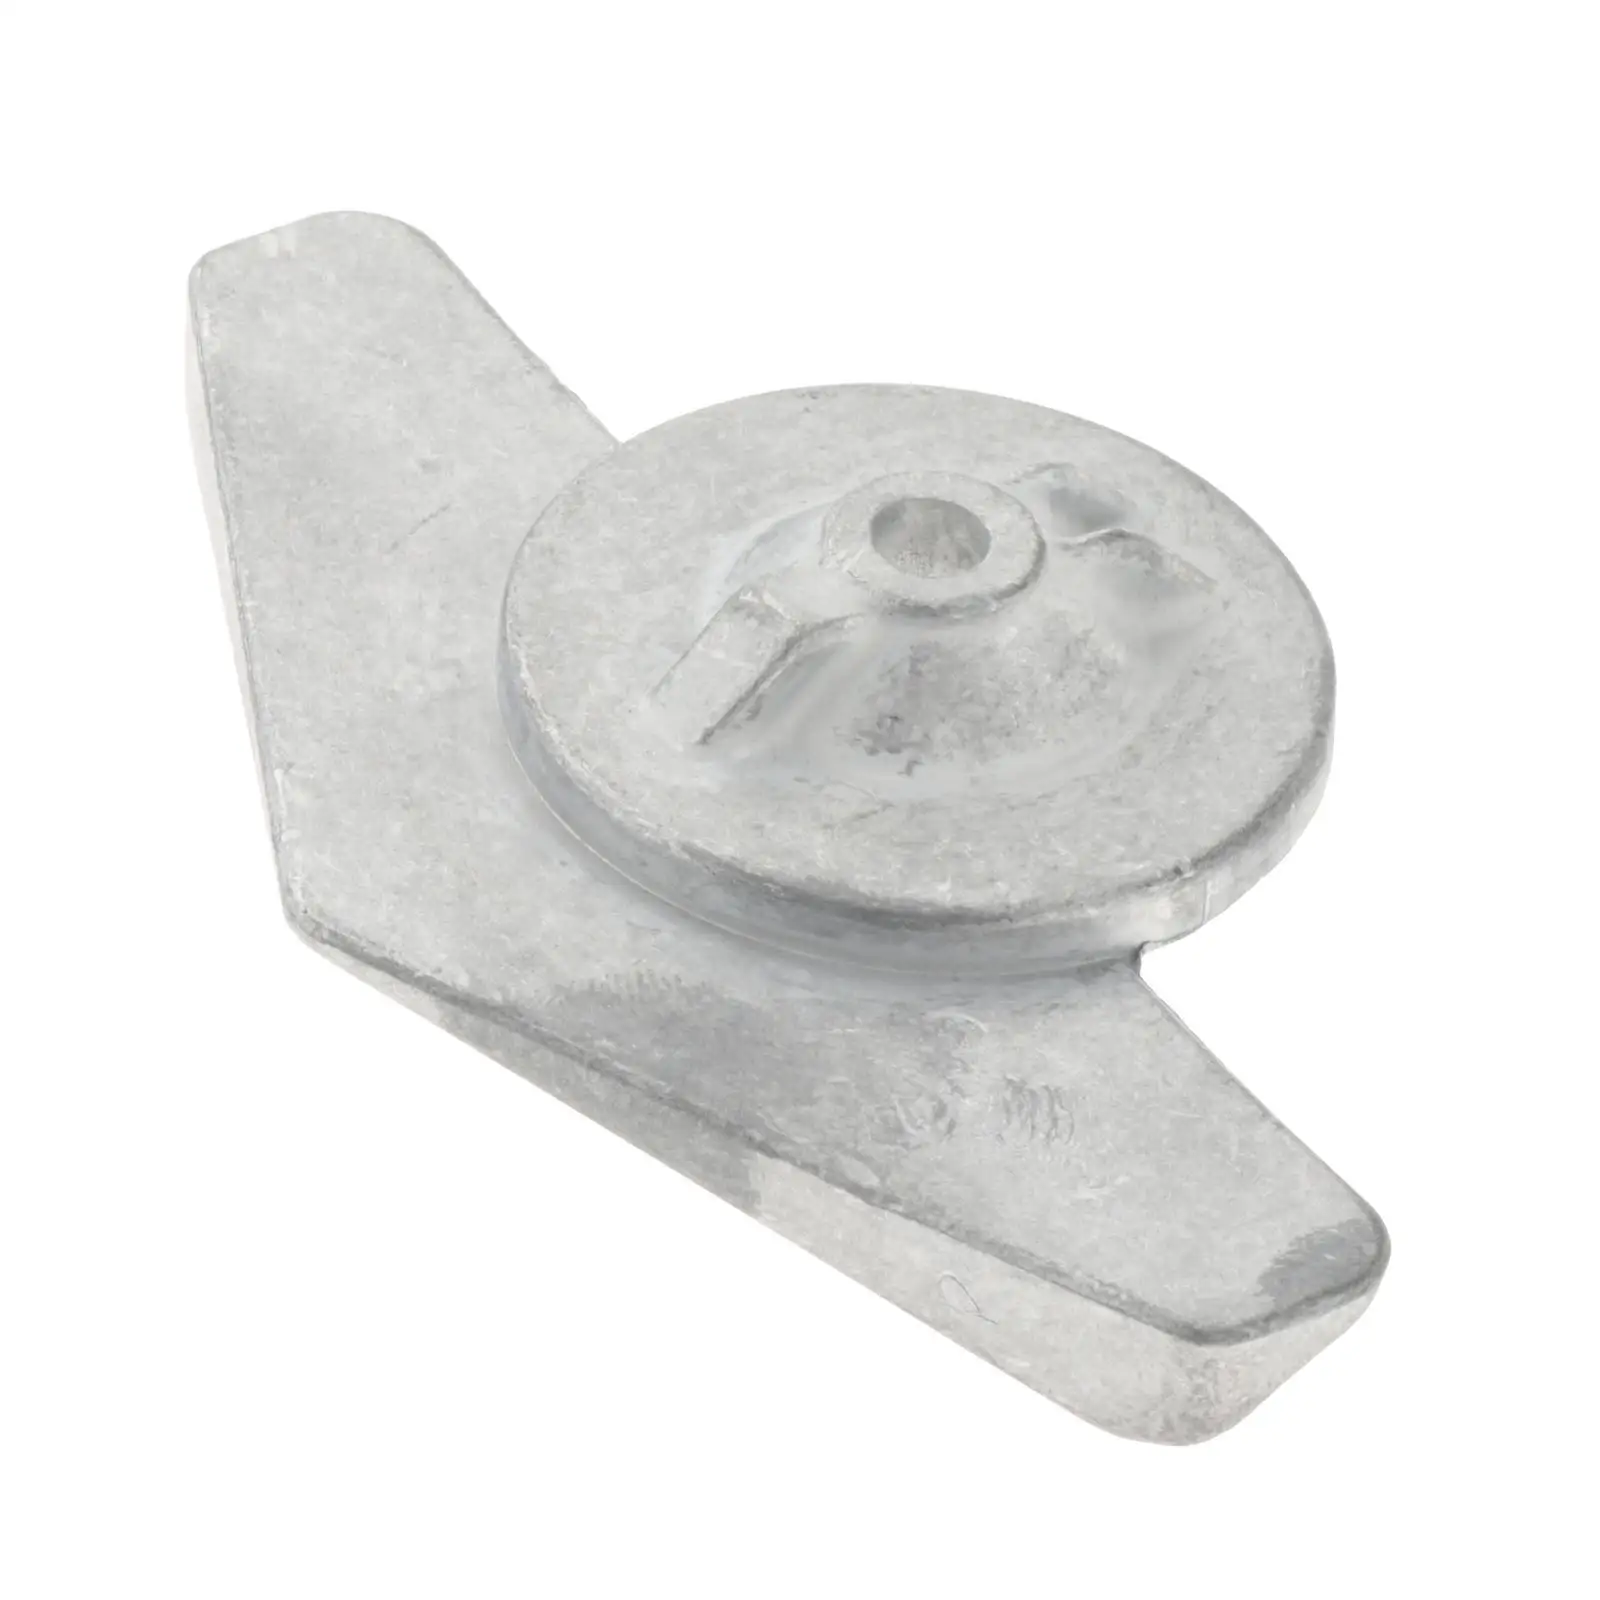 Anode Fits Outboard Motor 5 Stroke & Easy to Install Durable 683-45251-00 Parts